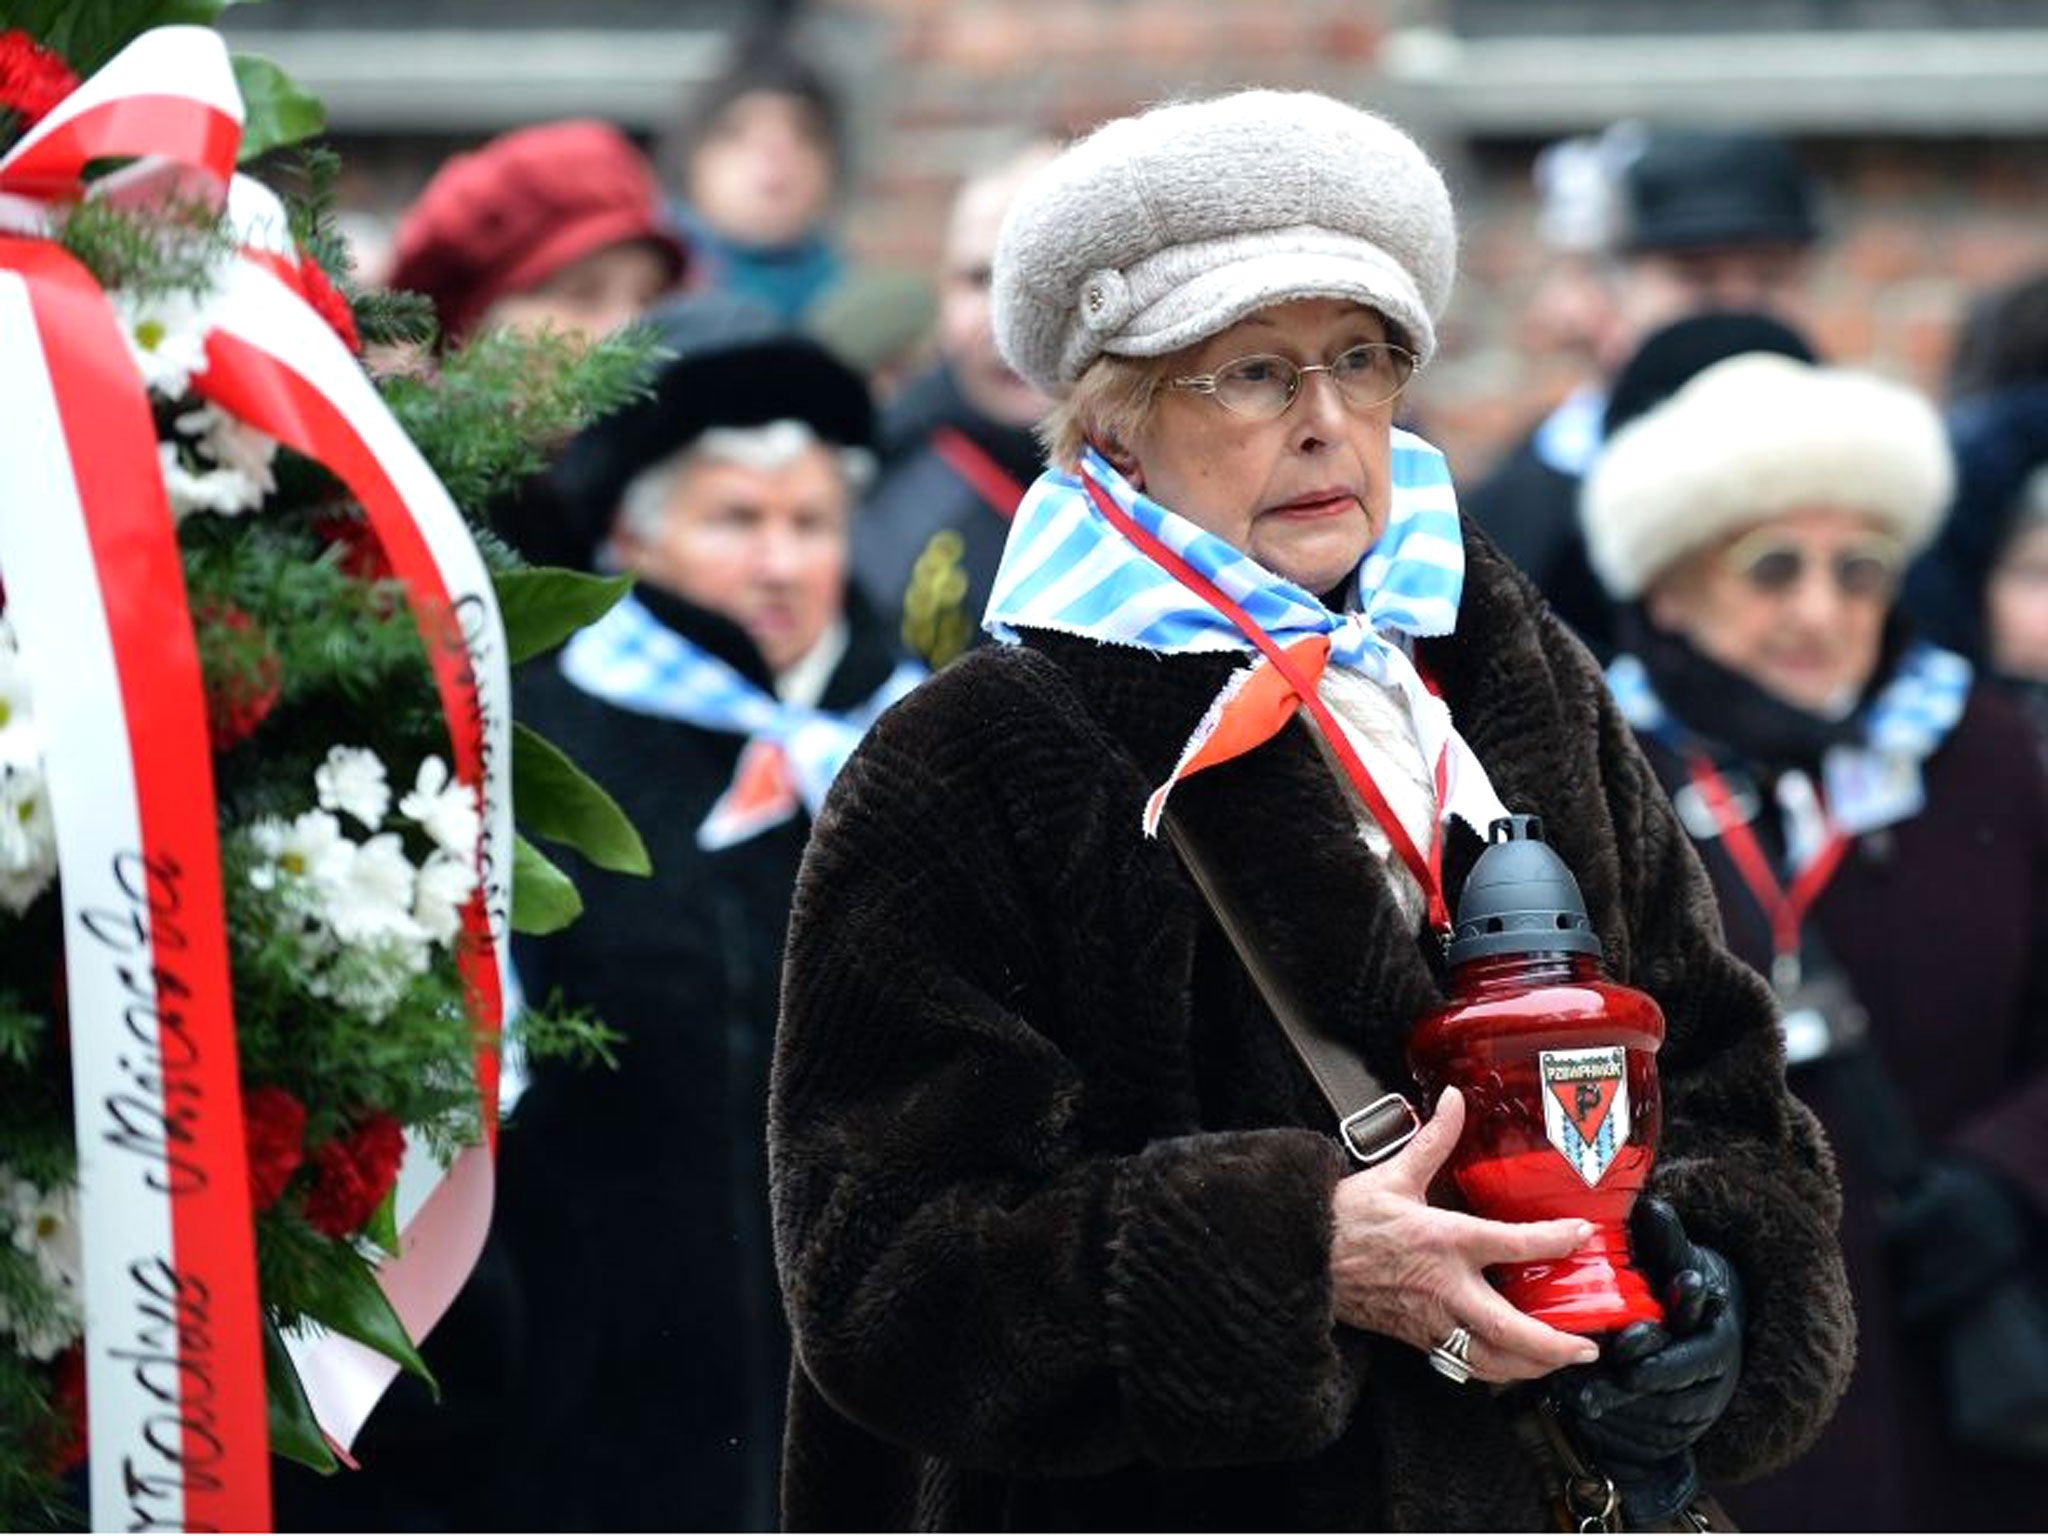 A ceremony at the memorial site of the former Nazi concentration camp Auschwitz-Birkenau in Oswiecim took place 69 years after the liberation of the death camp by Soviet troops, in remembrance of the victims of the Holocaust